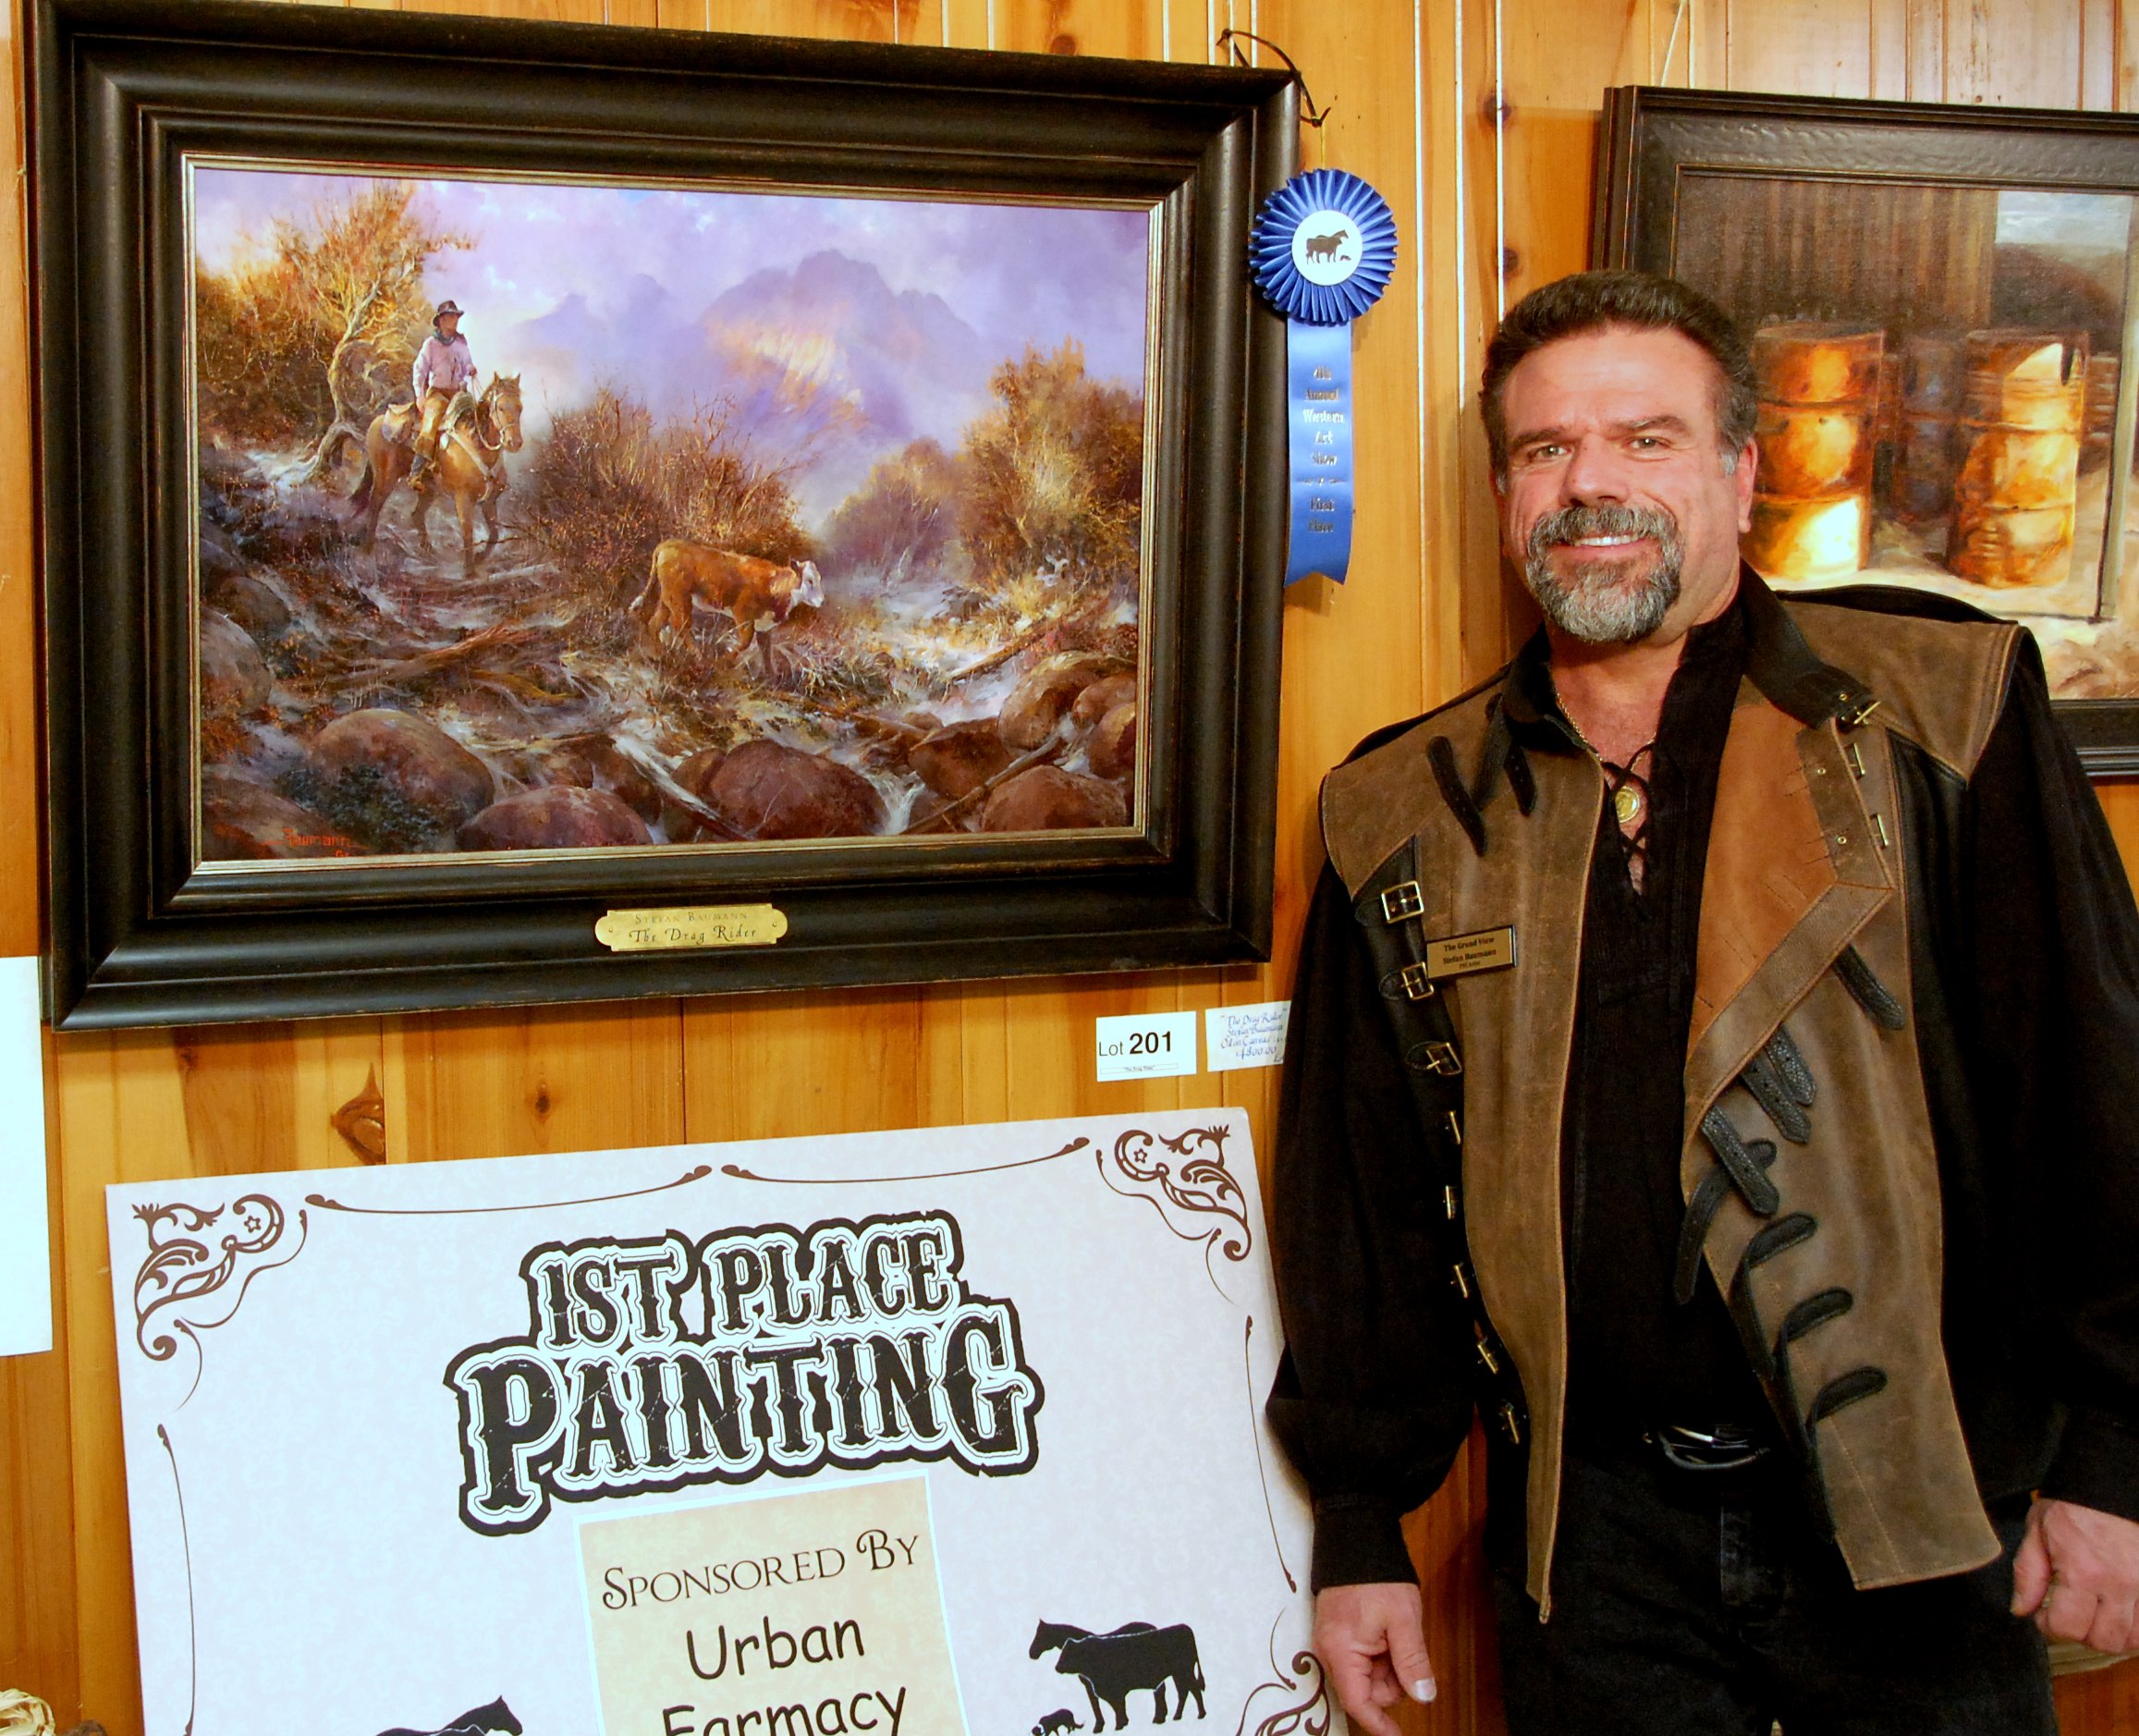 Image of artist Stefan Baumann with "The Drag Rider", first place painting at the 4th Annual Western Art Show in Red Bluff, CA, 2014.